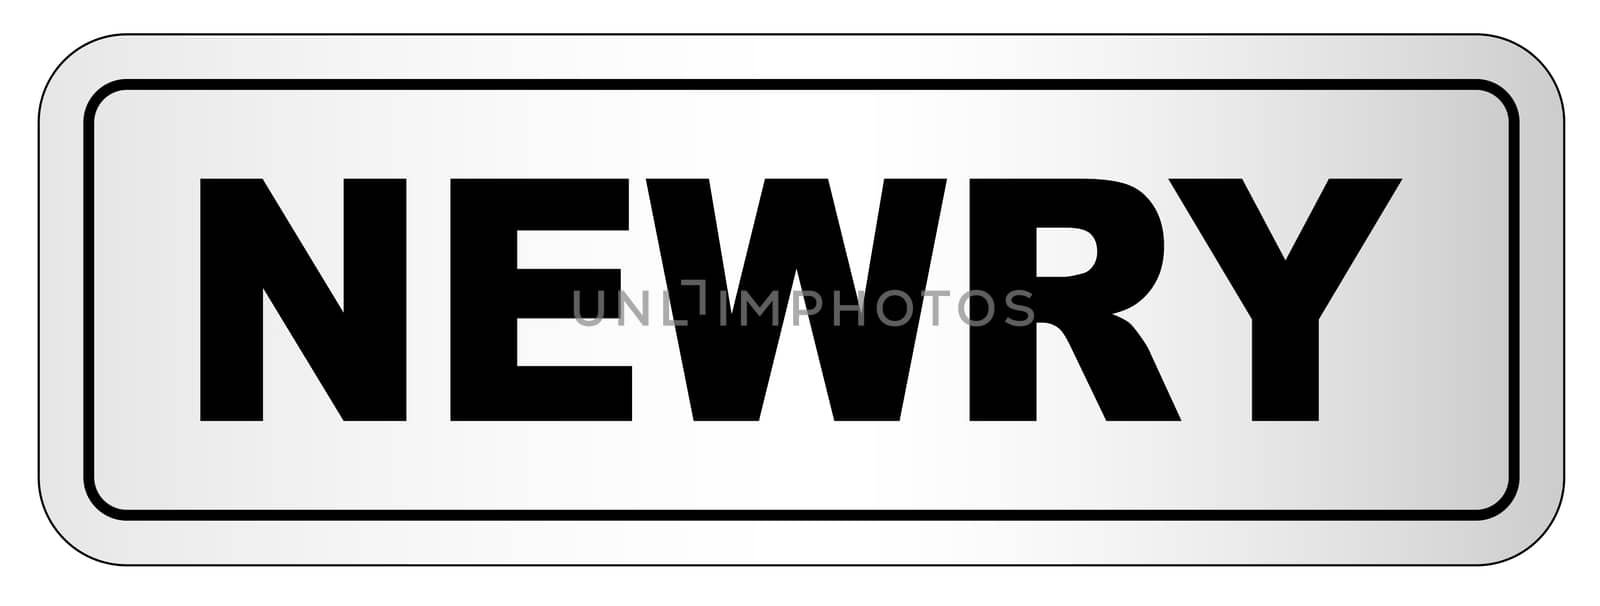 The city of Newry nameplate on a white background